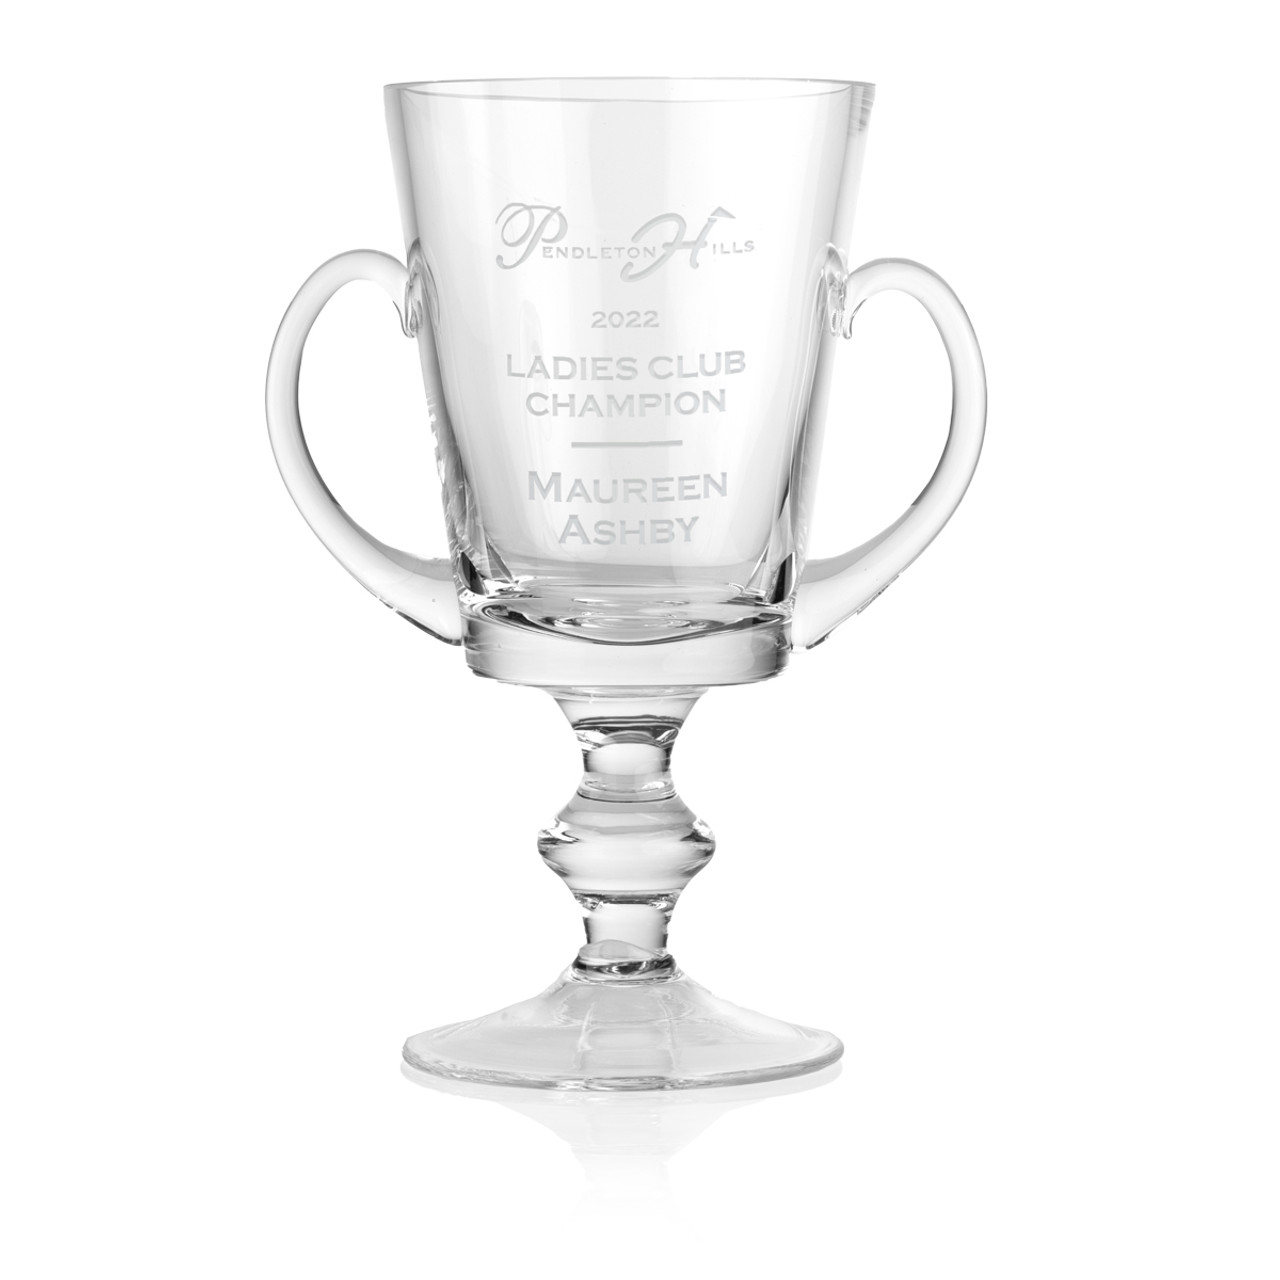 https://cdn11.bigcommerce.com/s-ke9t62di2j/images/stencil/1280x1280/products/879/3115/Crystalline_Trophy_Cup_with_Handles__04739.1657216127.jpg?c=2